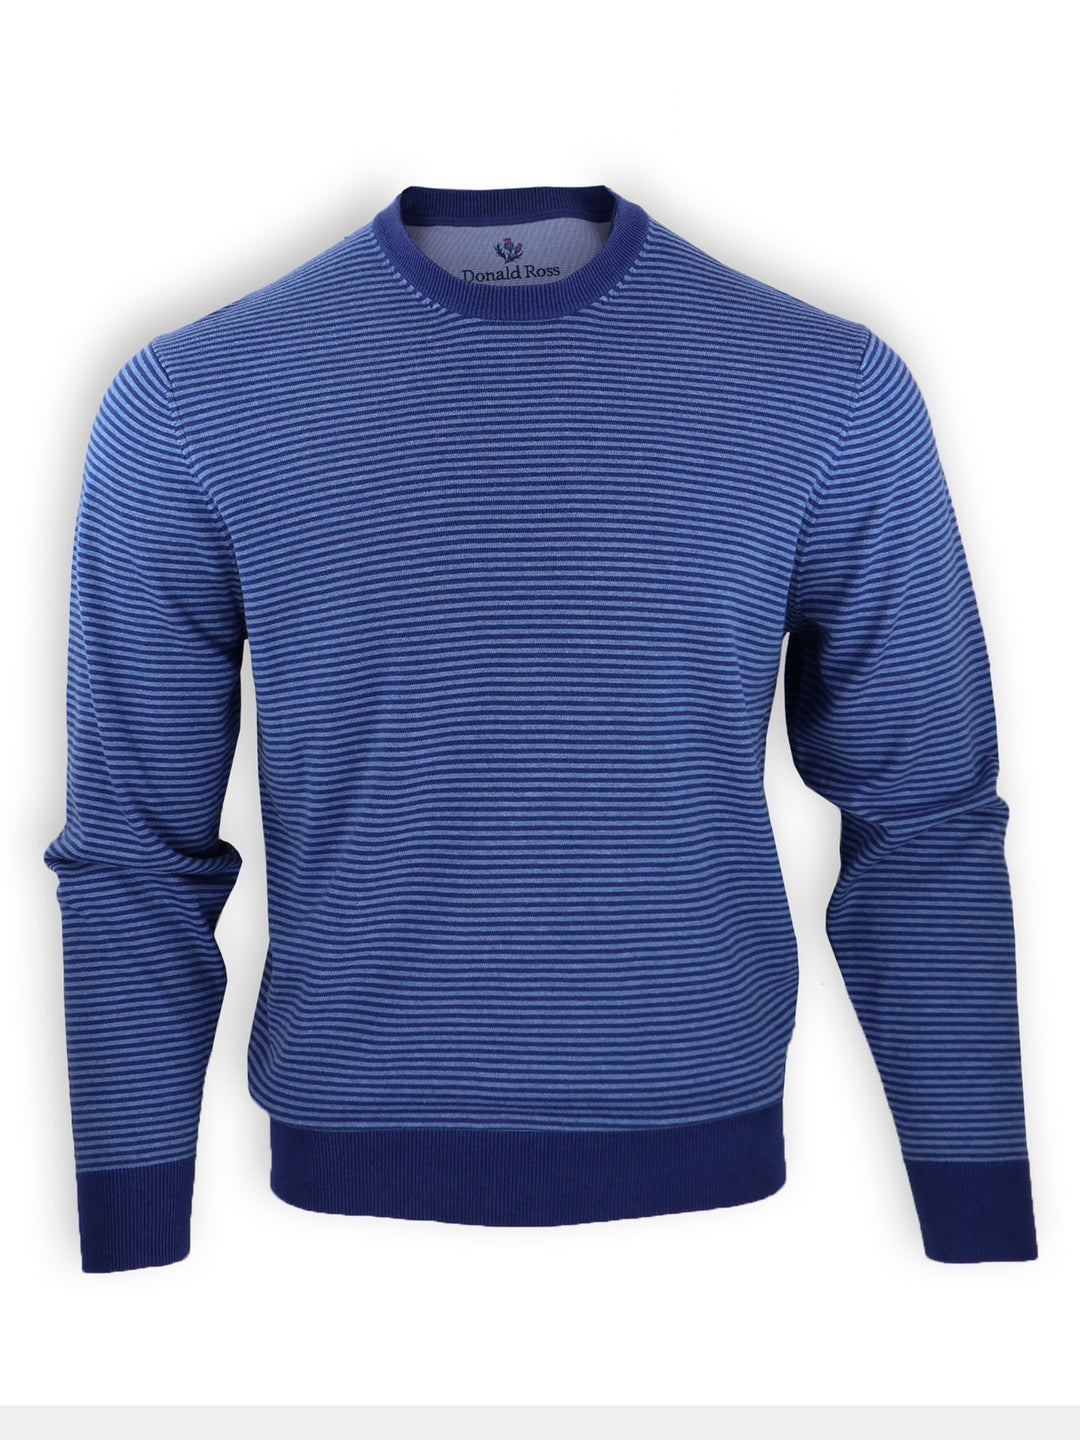 Donald Ross Mens 2-Color Feeder Stripe Cotton Jersey Crewneck - NAVY - Golf Anything Canada